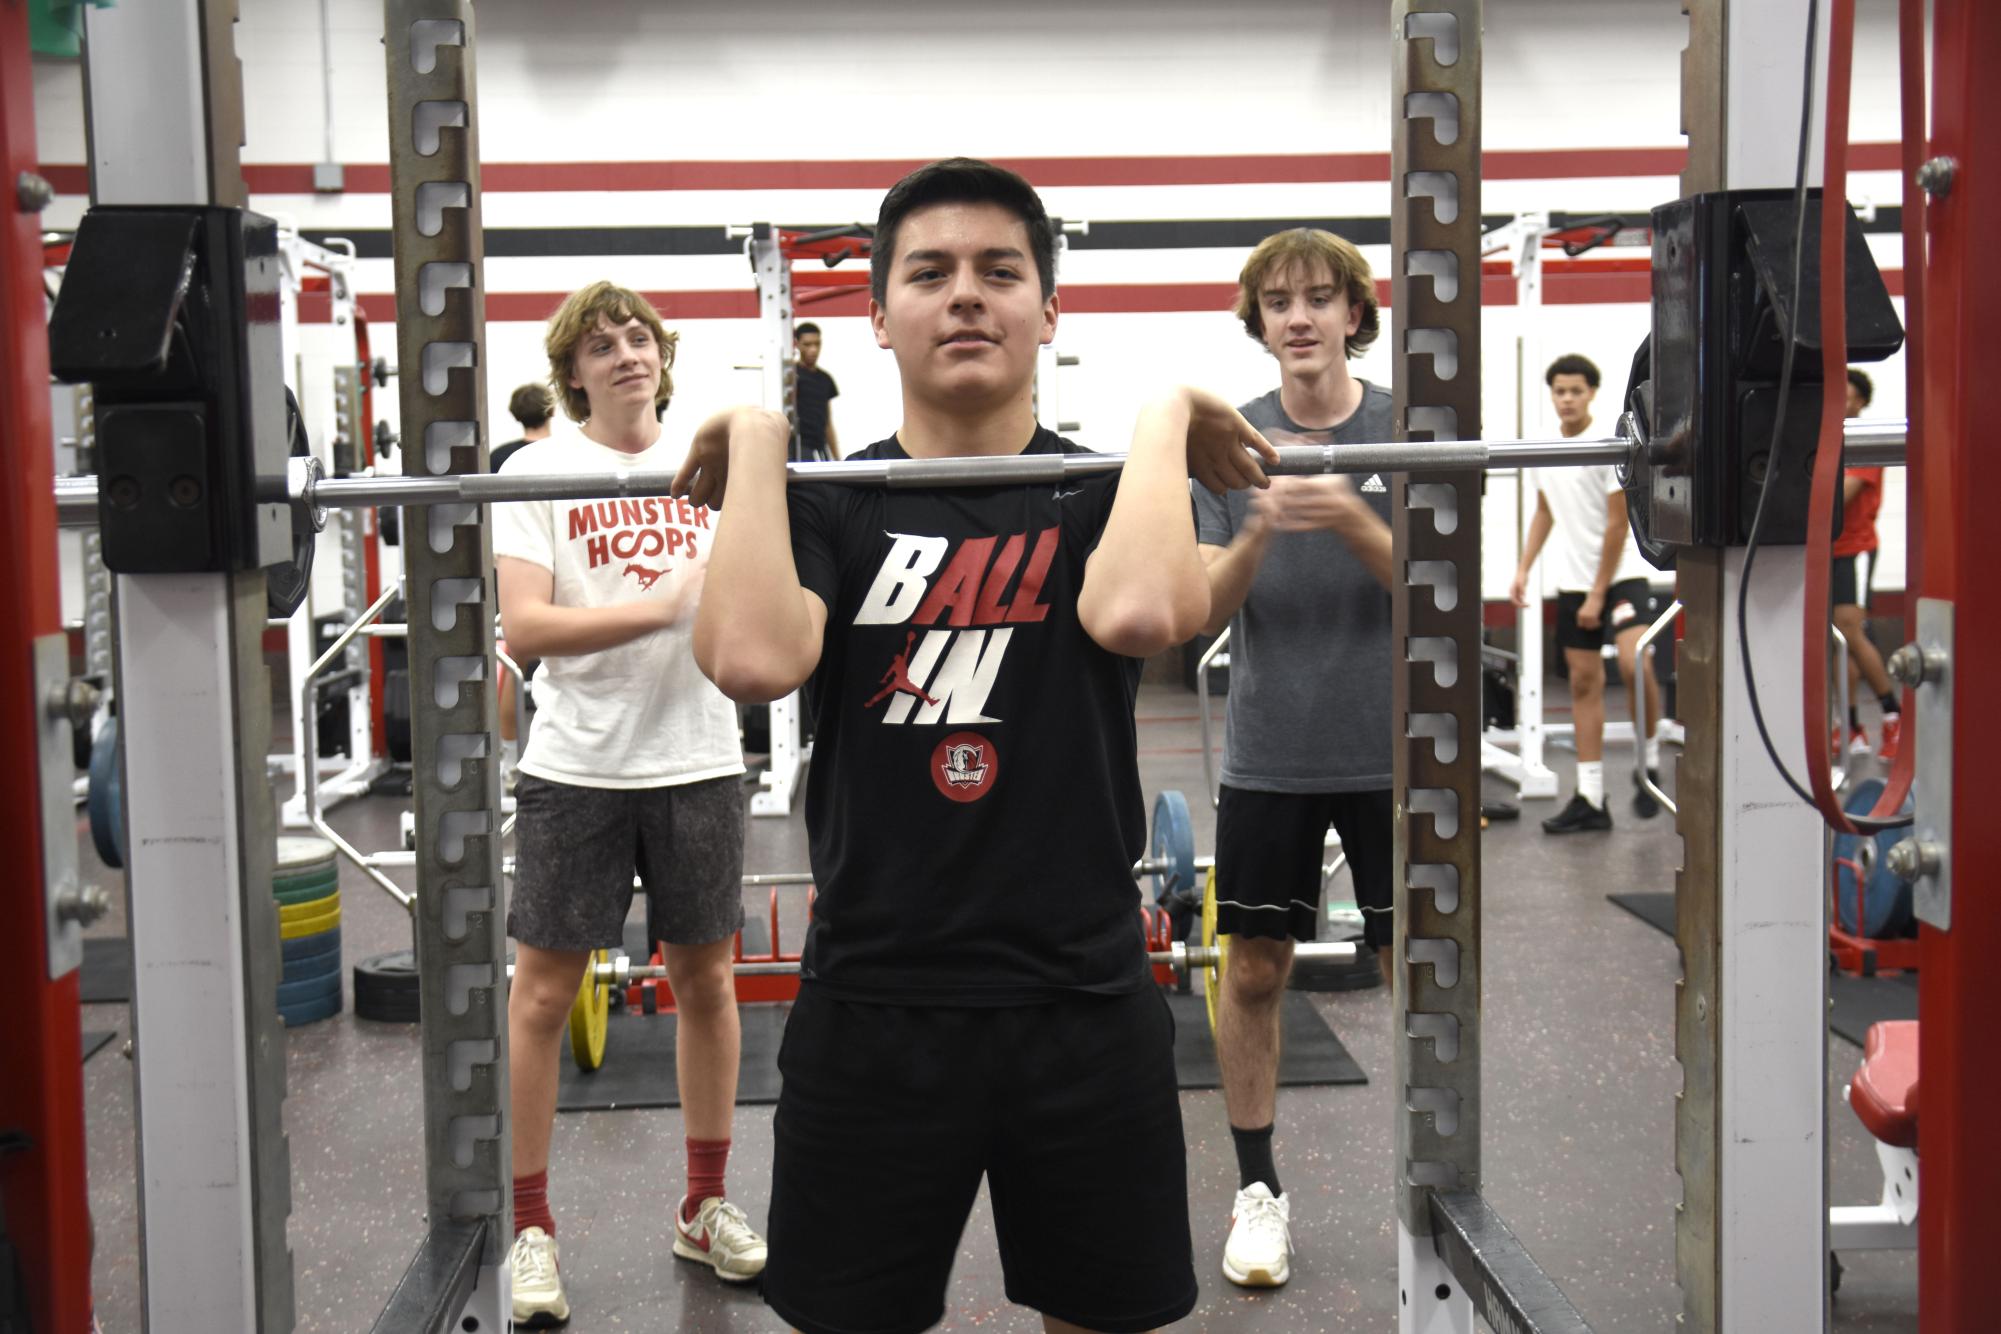 TREAT GYM DAY LIKE GAME DAY Cheering on sophomore Aidan Prado, sophomores Jake Greiner and Carter Moore watch as he lifts. In the weight room after school, the boys’ basketball team works on physical fitness in preparation for the start of their season. “Teamwork is important because it’s a good way to motivate each other to get stronger and work harder,” Greiner said. 